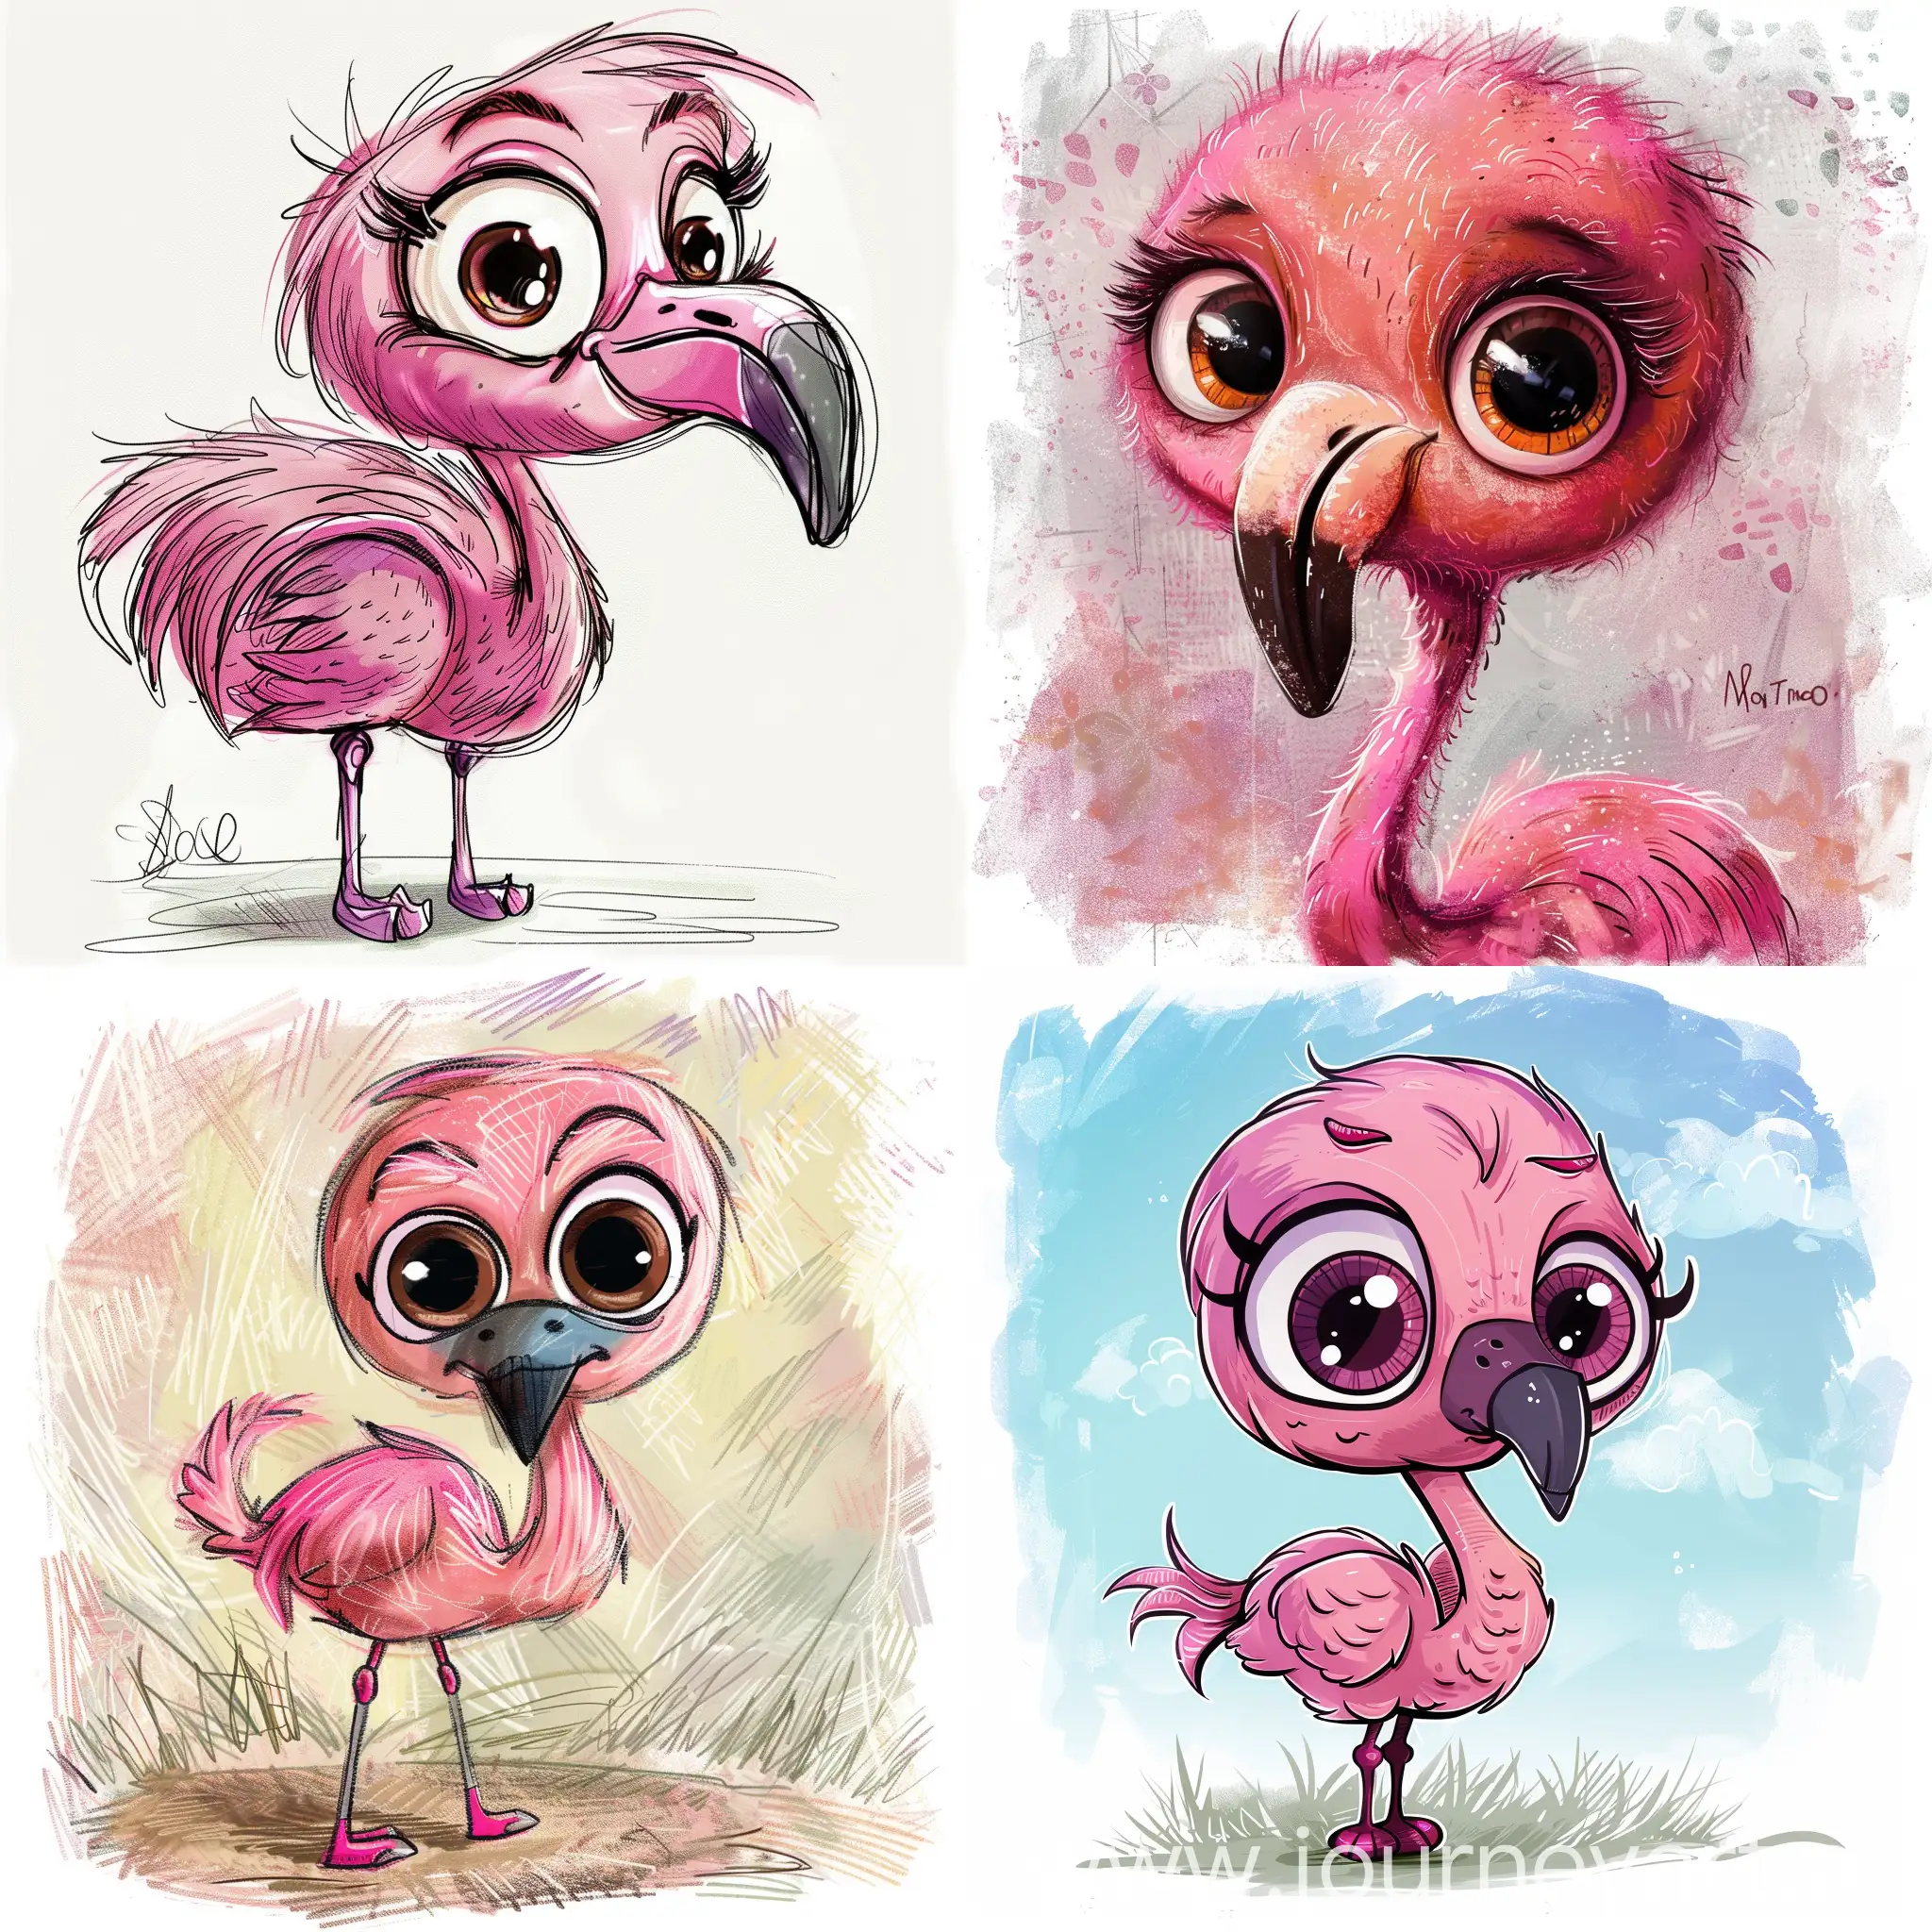 Adorable-Pink-Flamingo-with-Big-Eyes-in-Cute-Drawing-Style